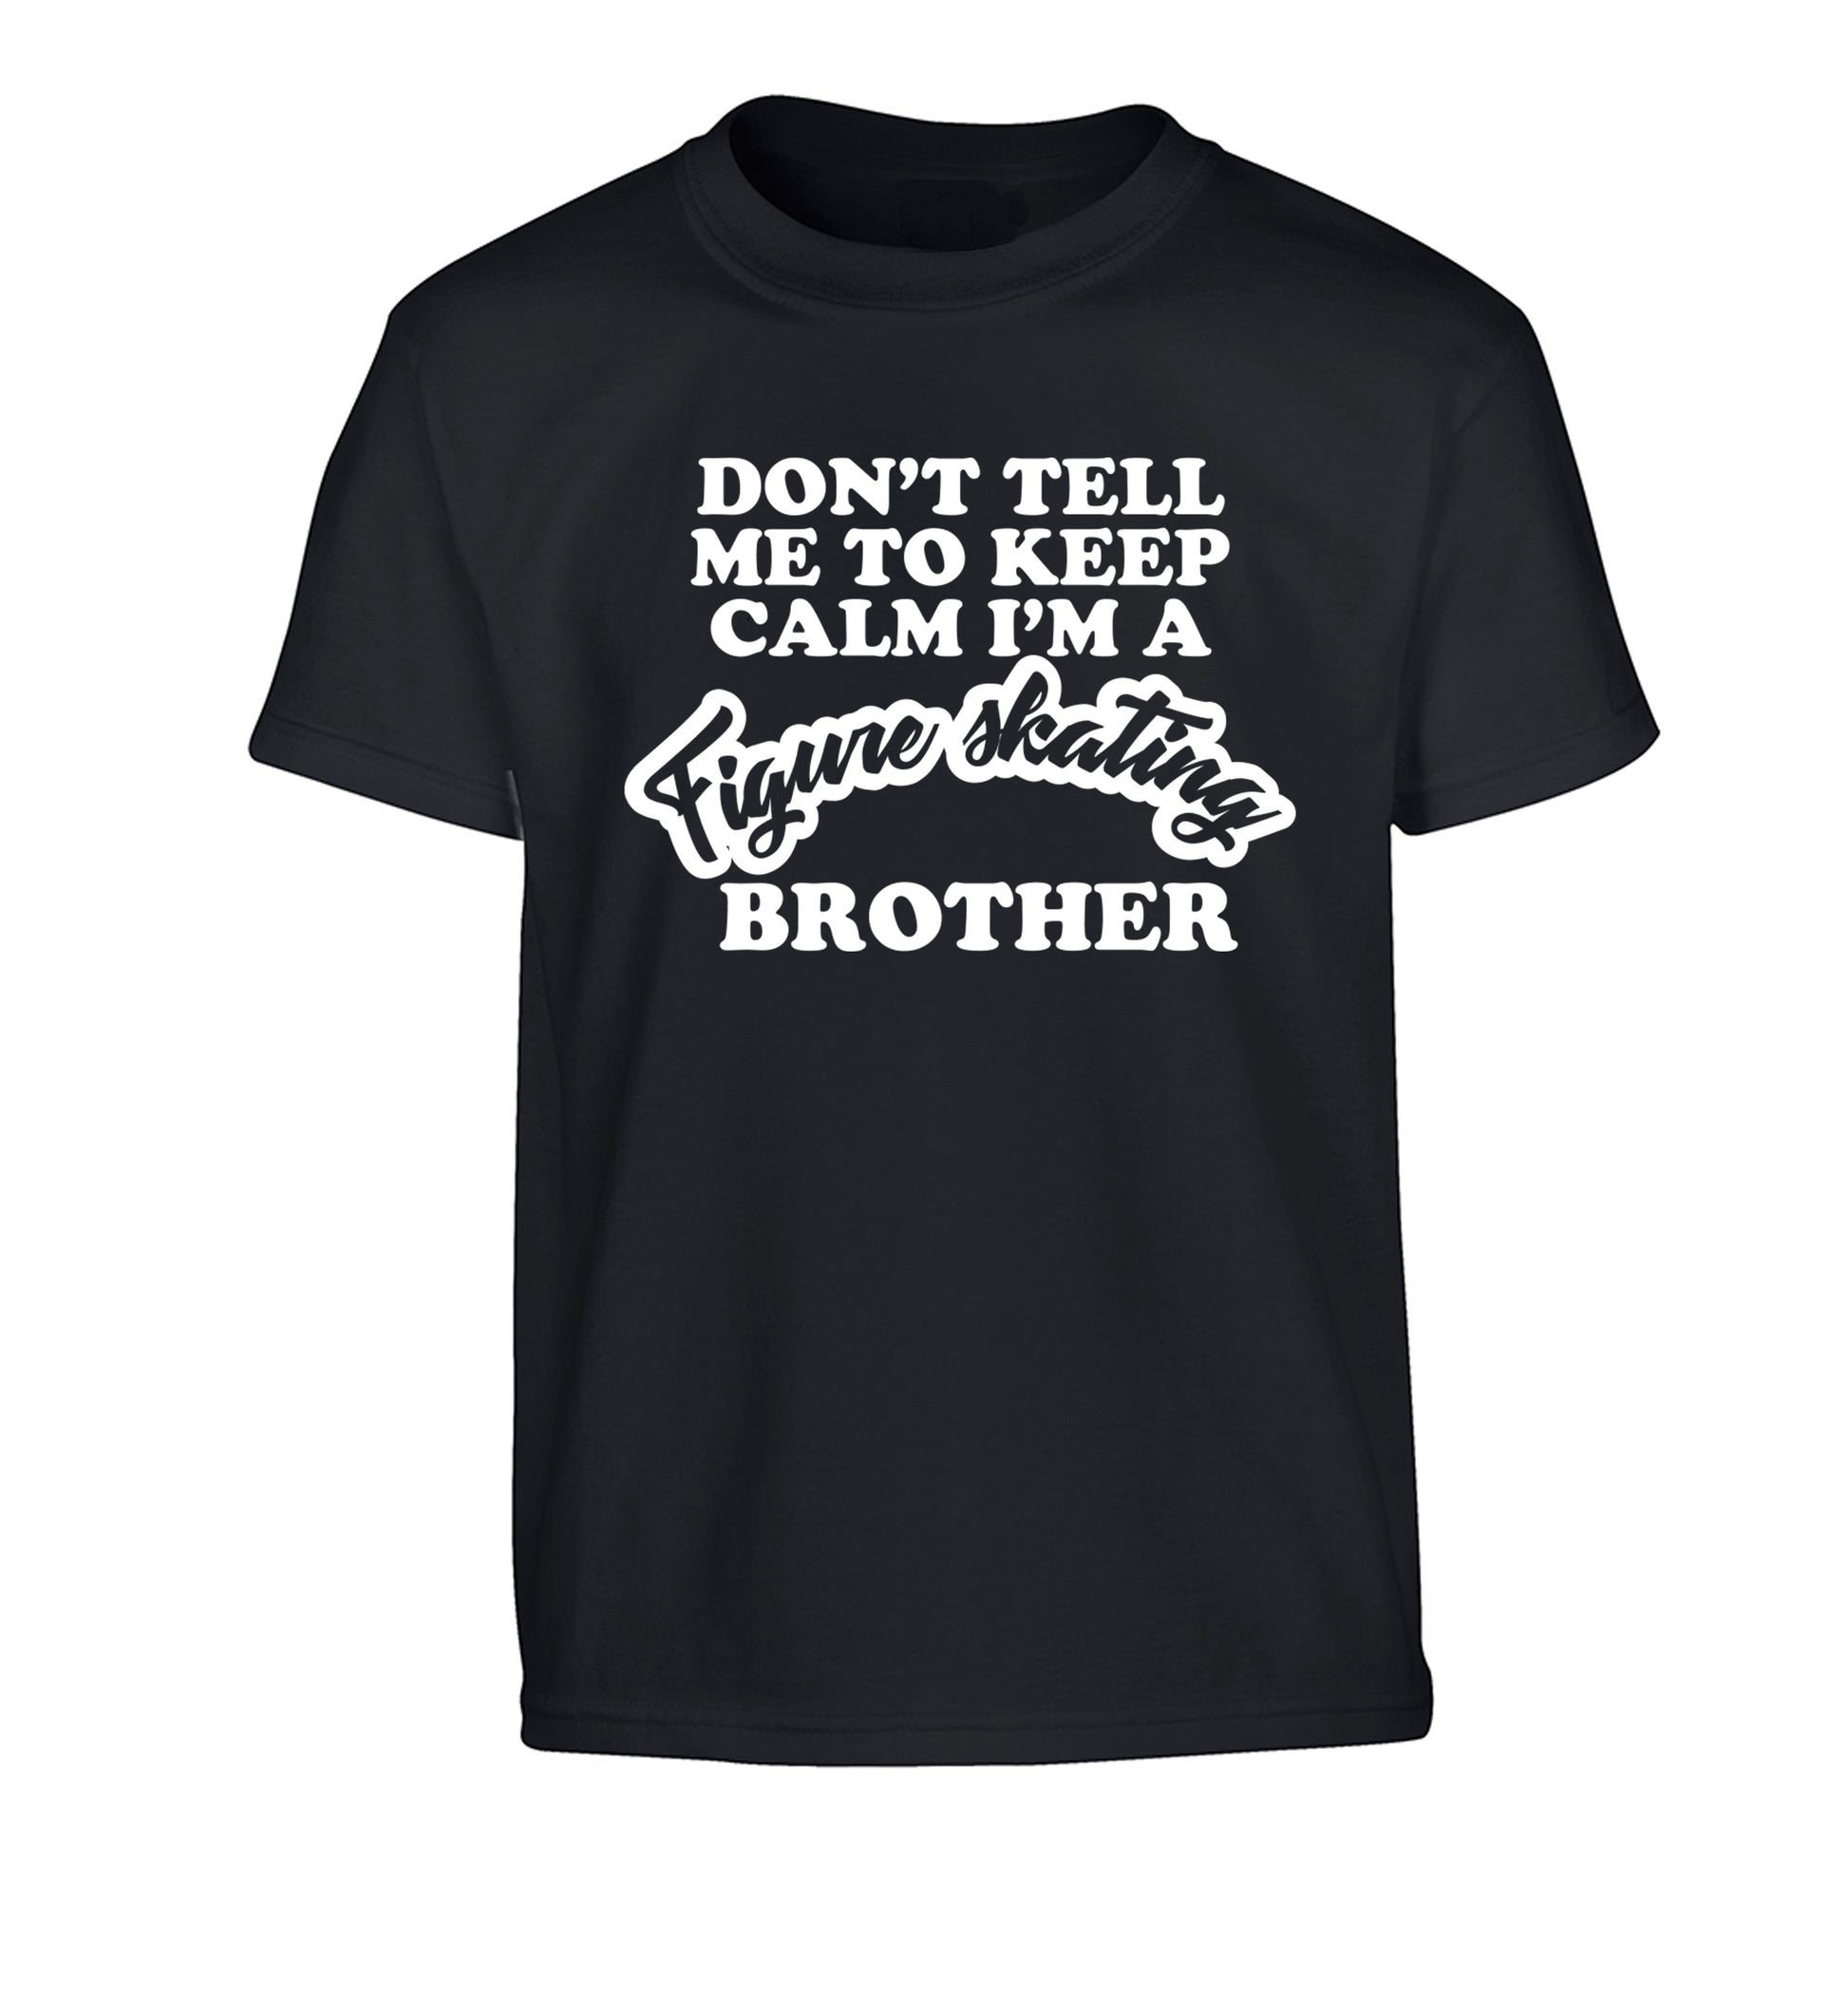 Don't tell me to keep calm I'm a figure skating brother Children's black Tshirt 12-14 Years